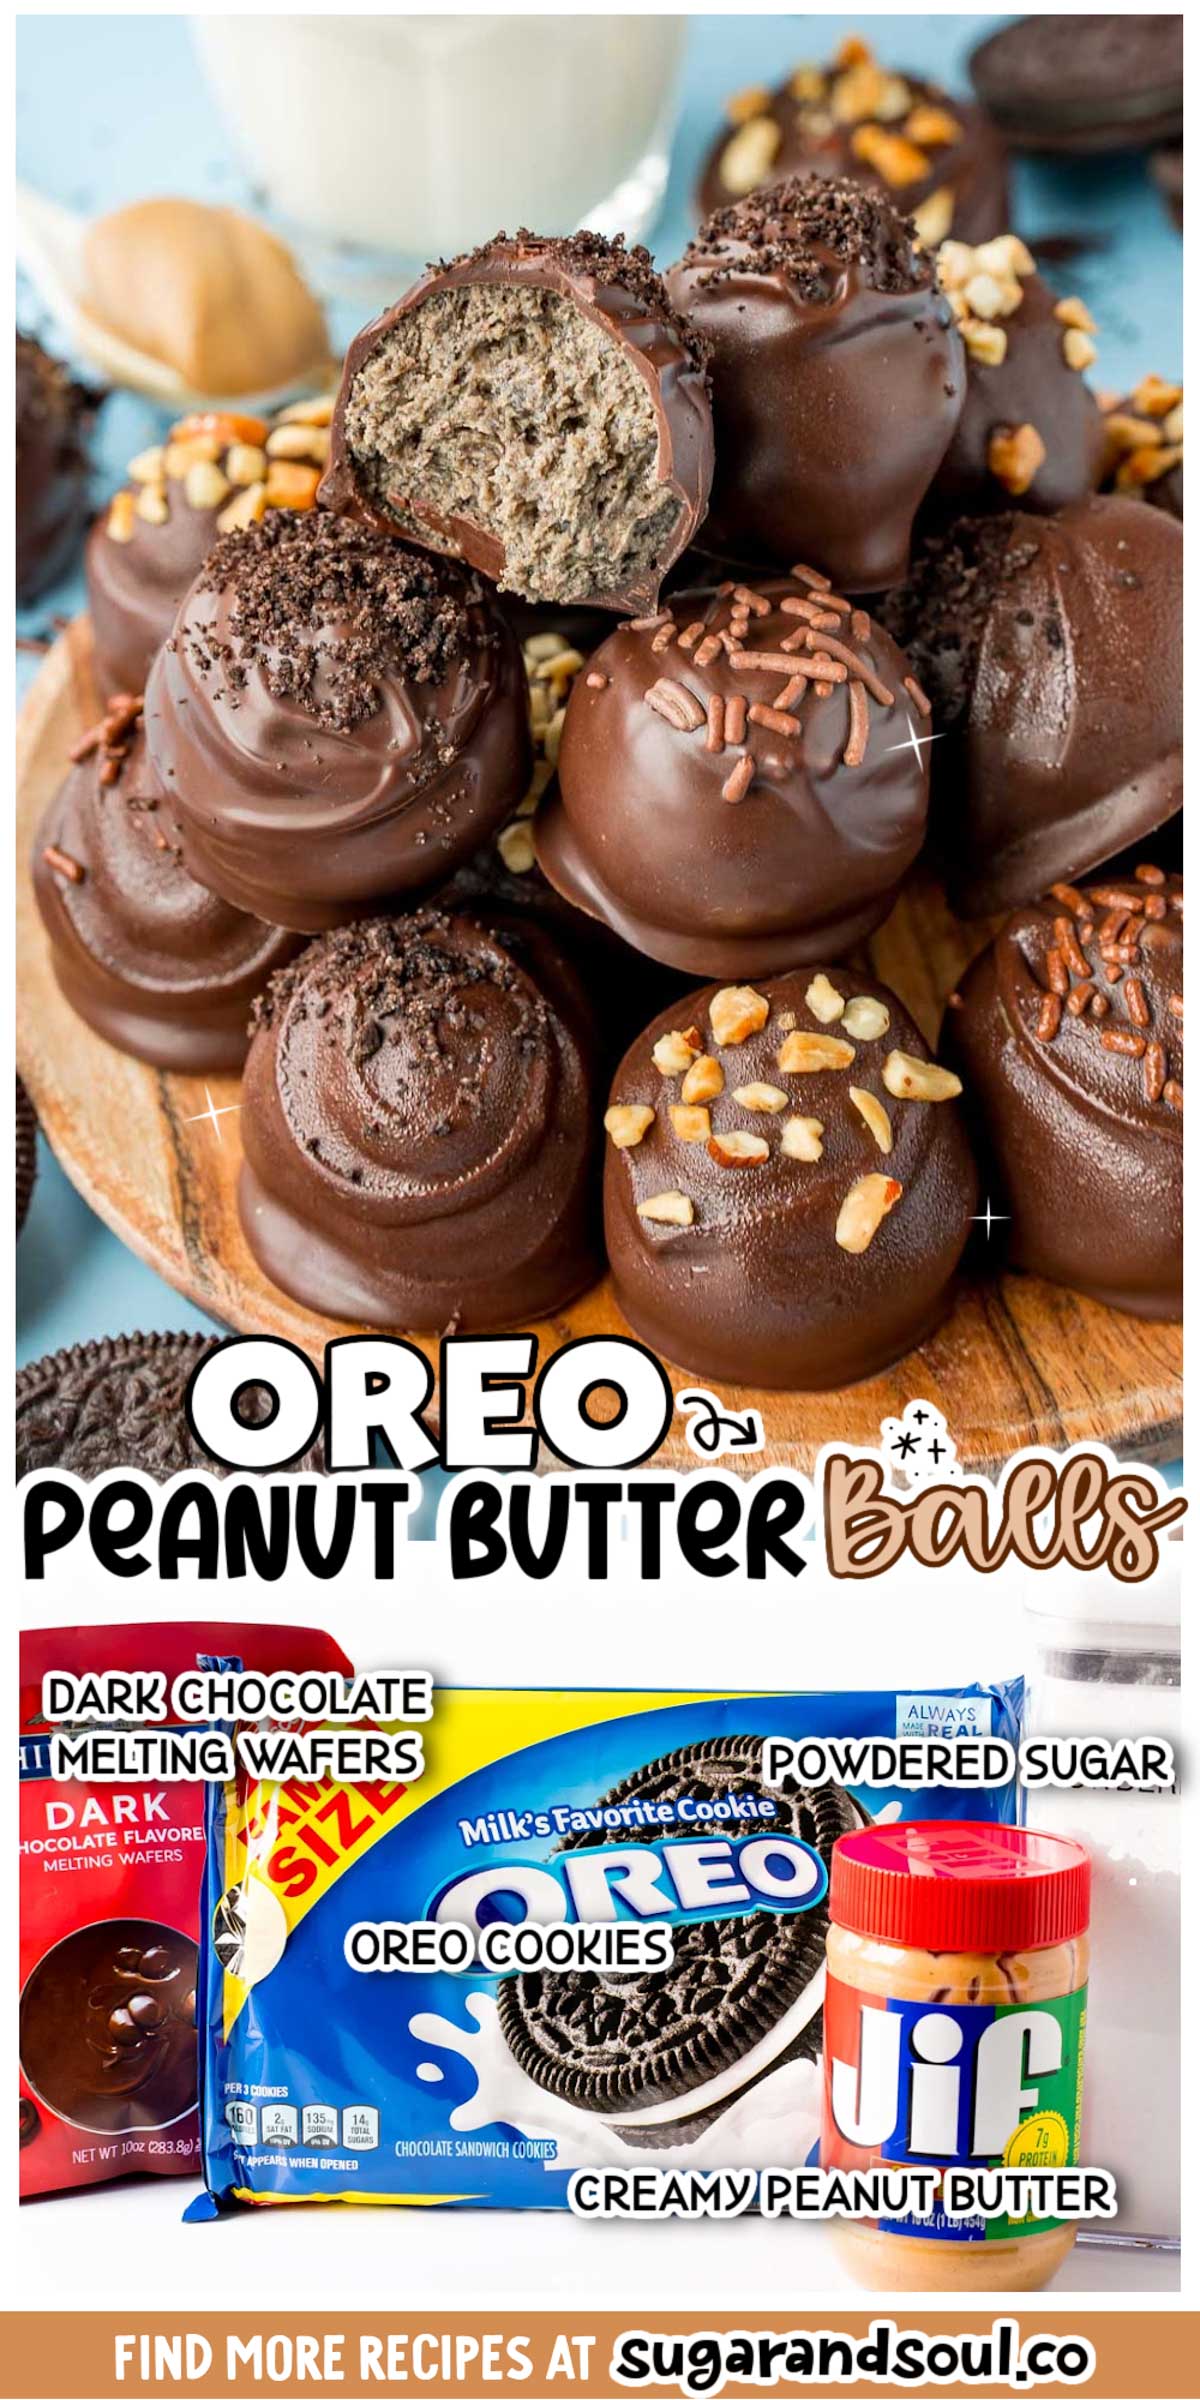 Oreo Peanut Butter Balls have an easy 3-ingredient filling that's formed into fun bite sizes before being dipped into melted dark chocolate! Prep a batch in only 30 minutes! via @sugarandsoulco